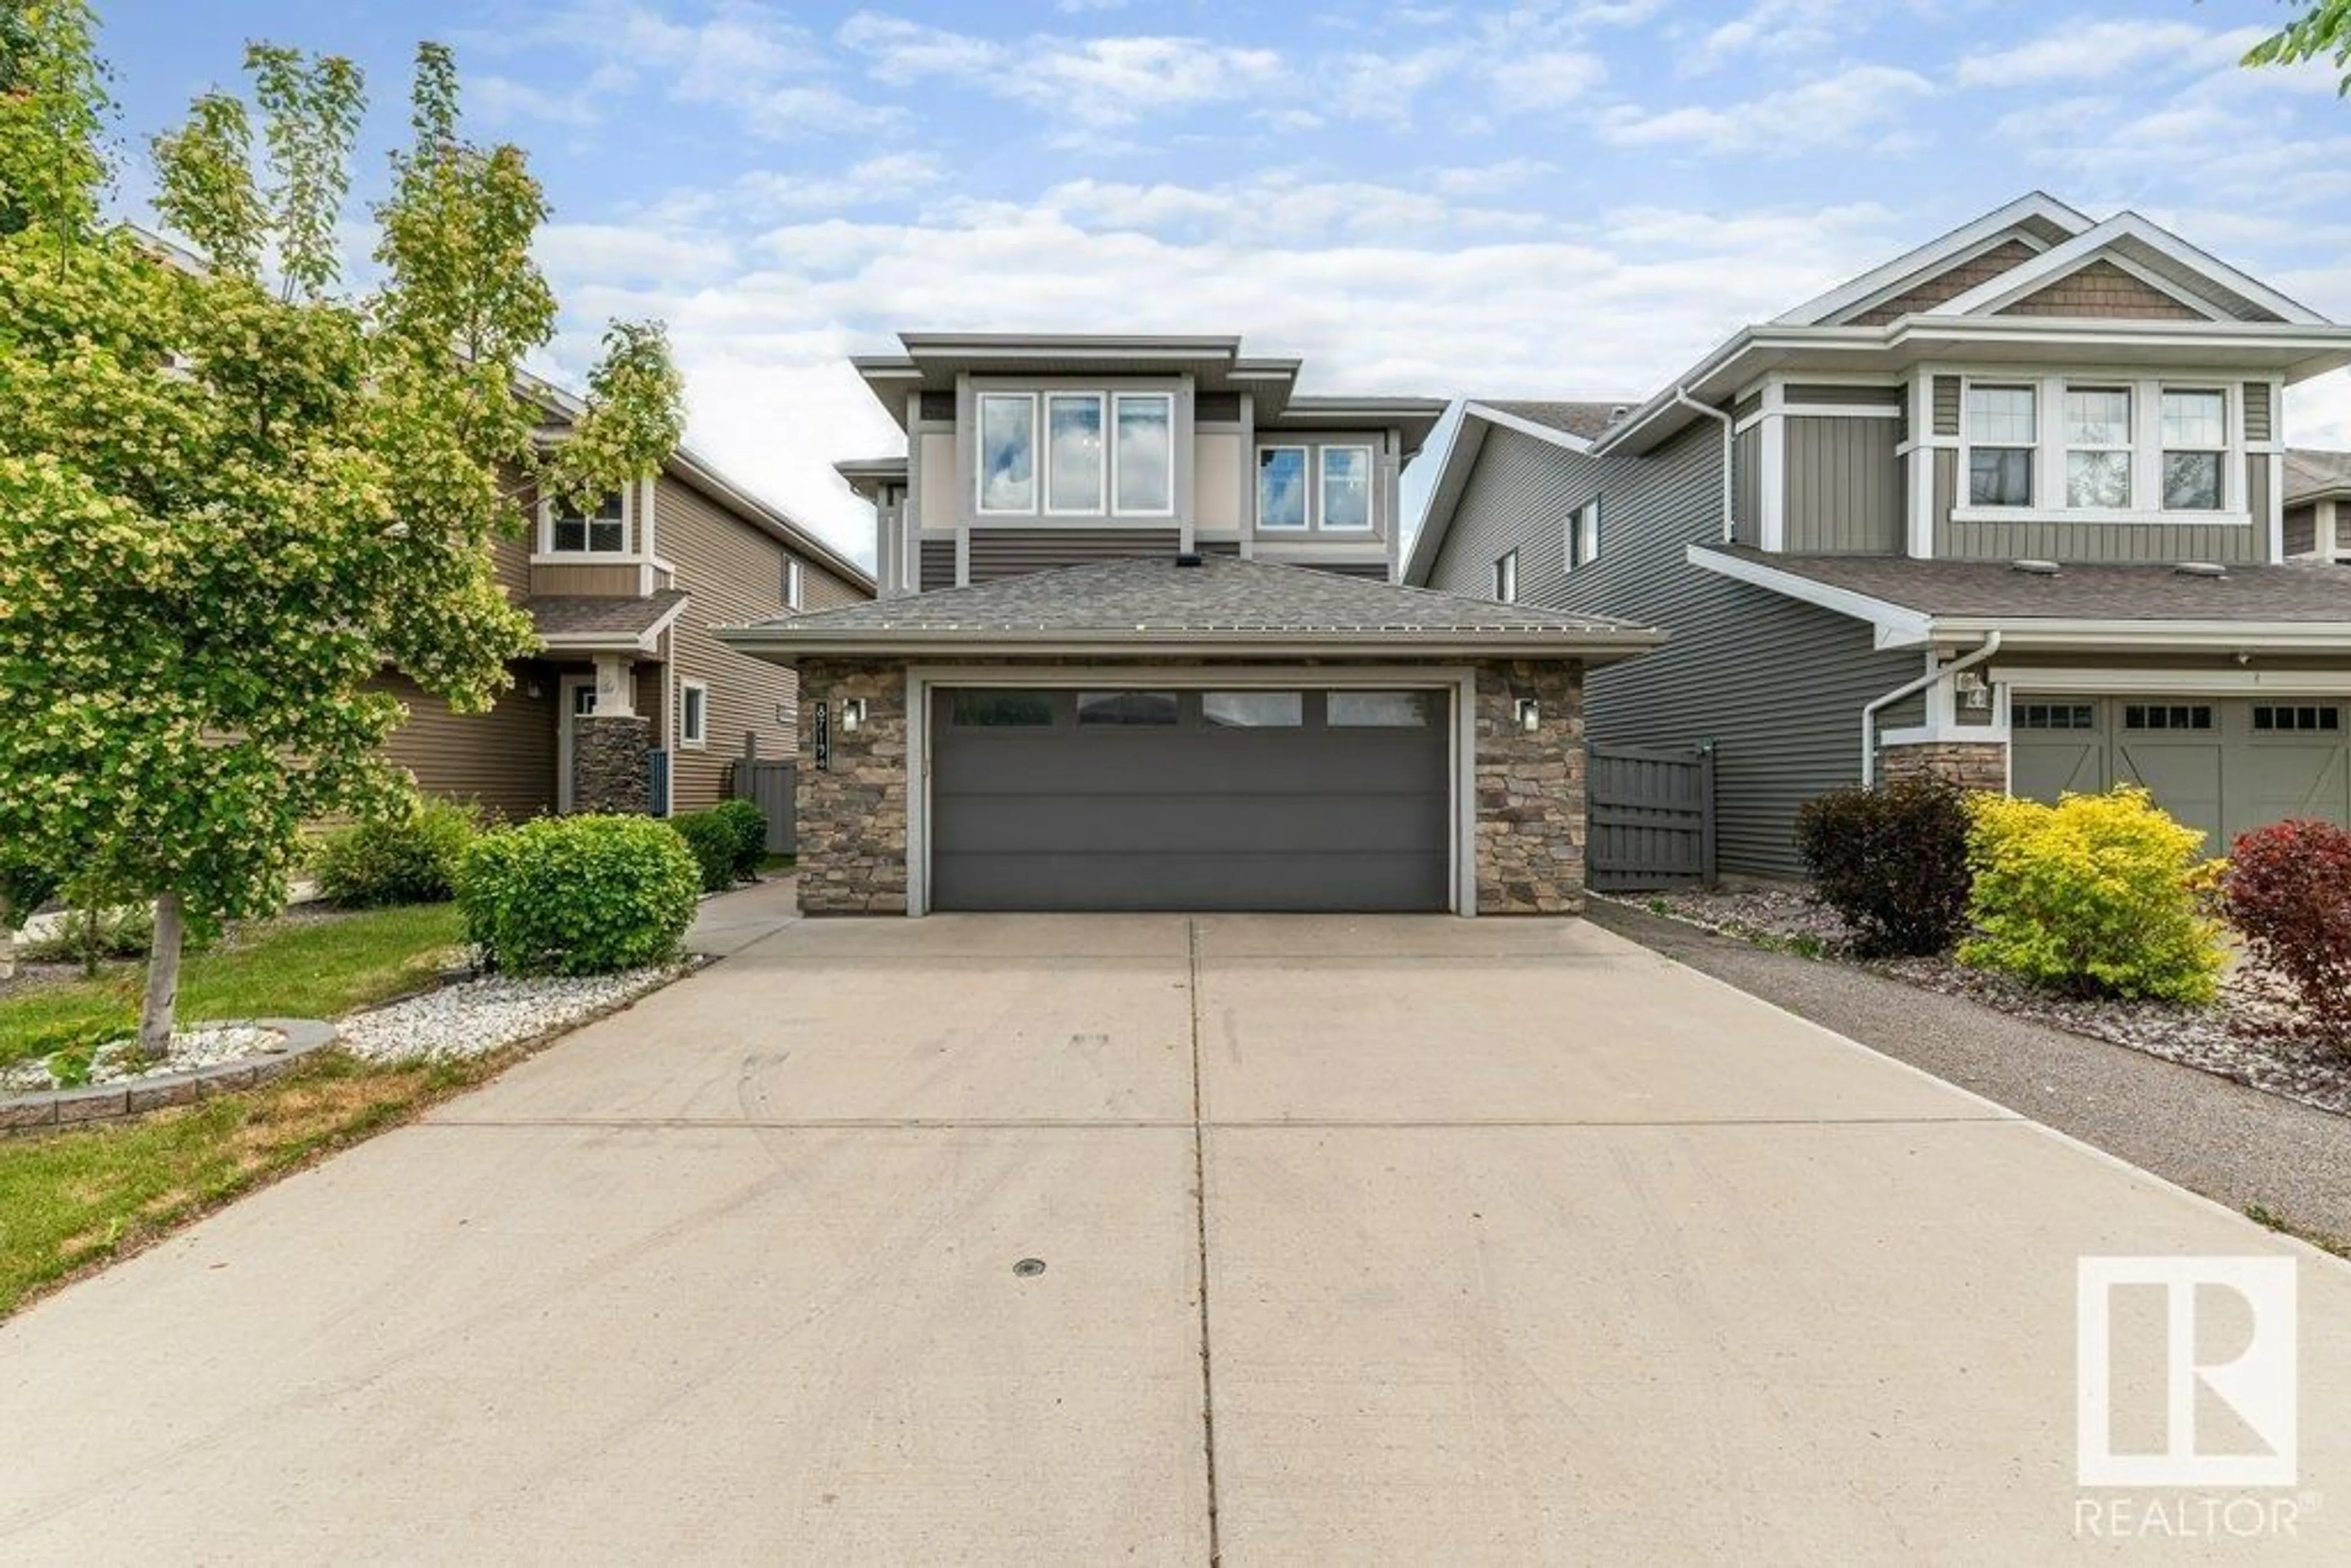 Frontside or backside of a home for 8719 218 ST NW, Edmonton Alberta T5T4R7